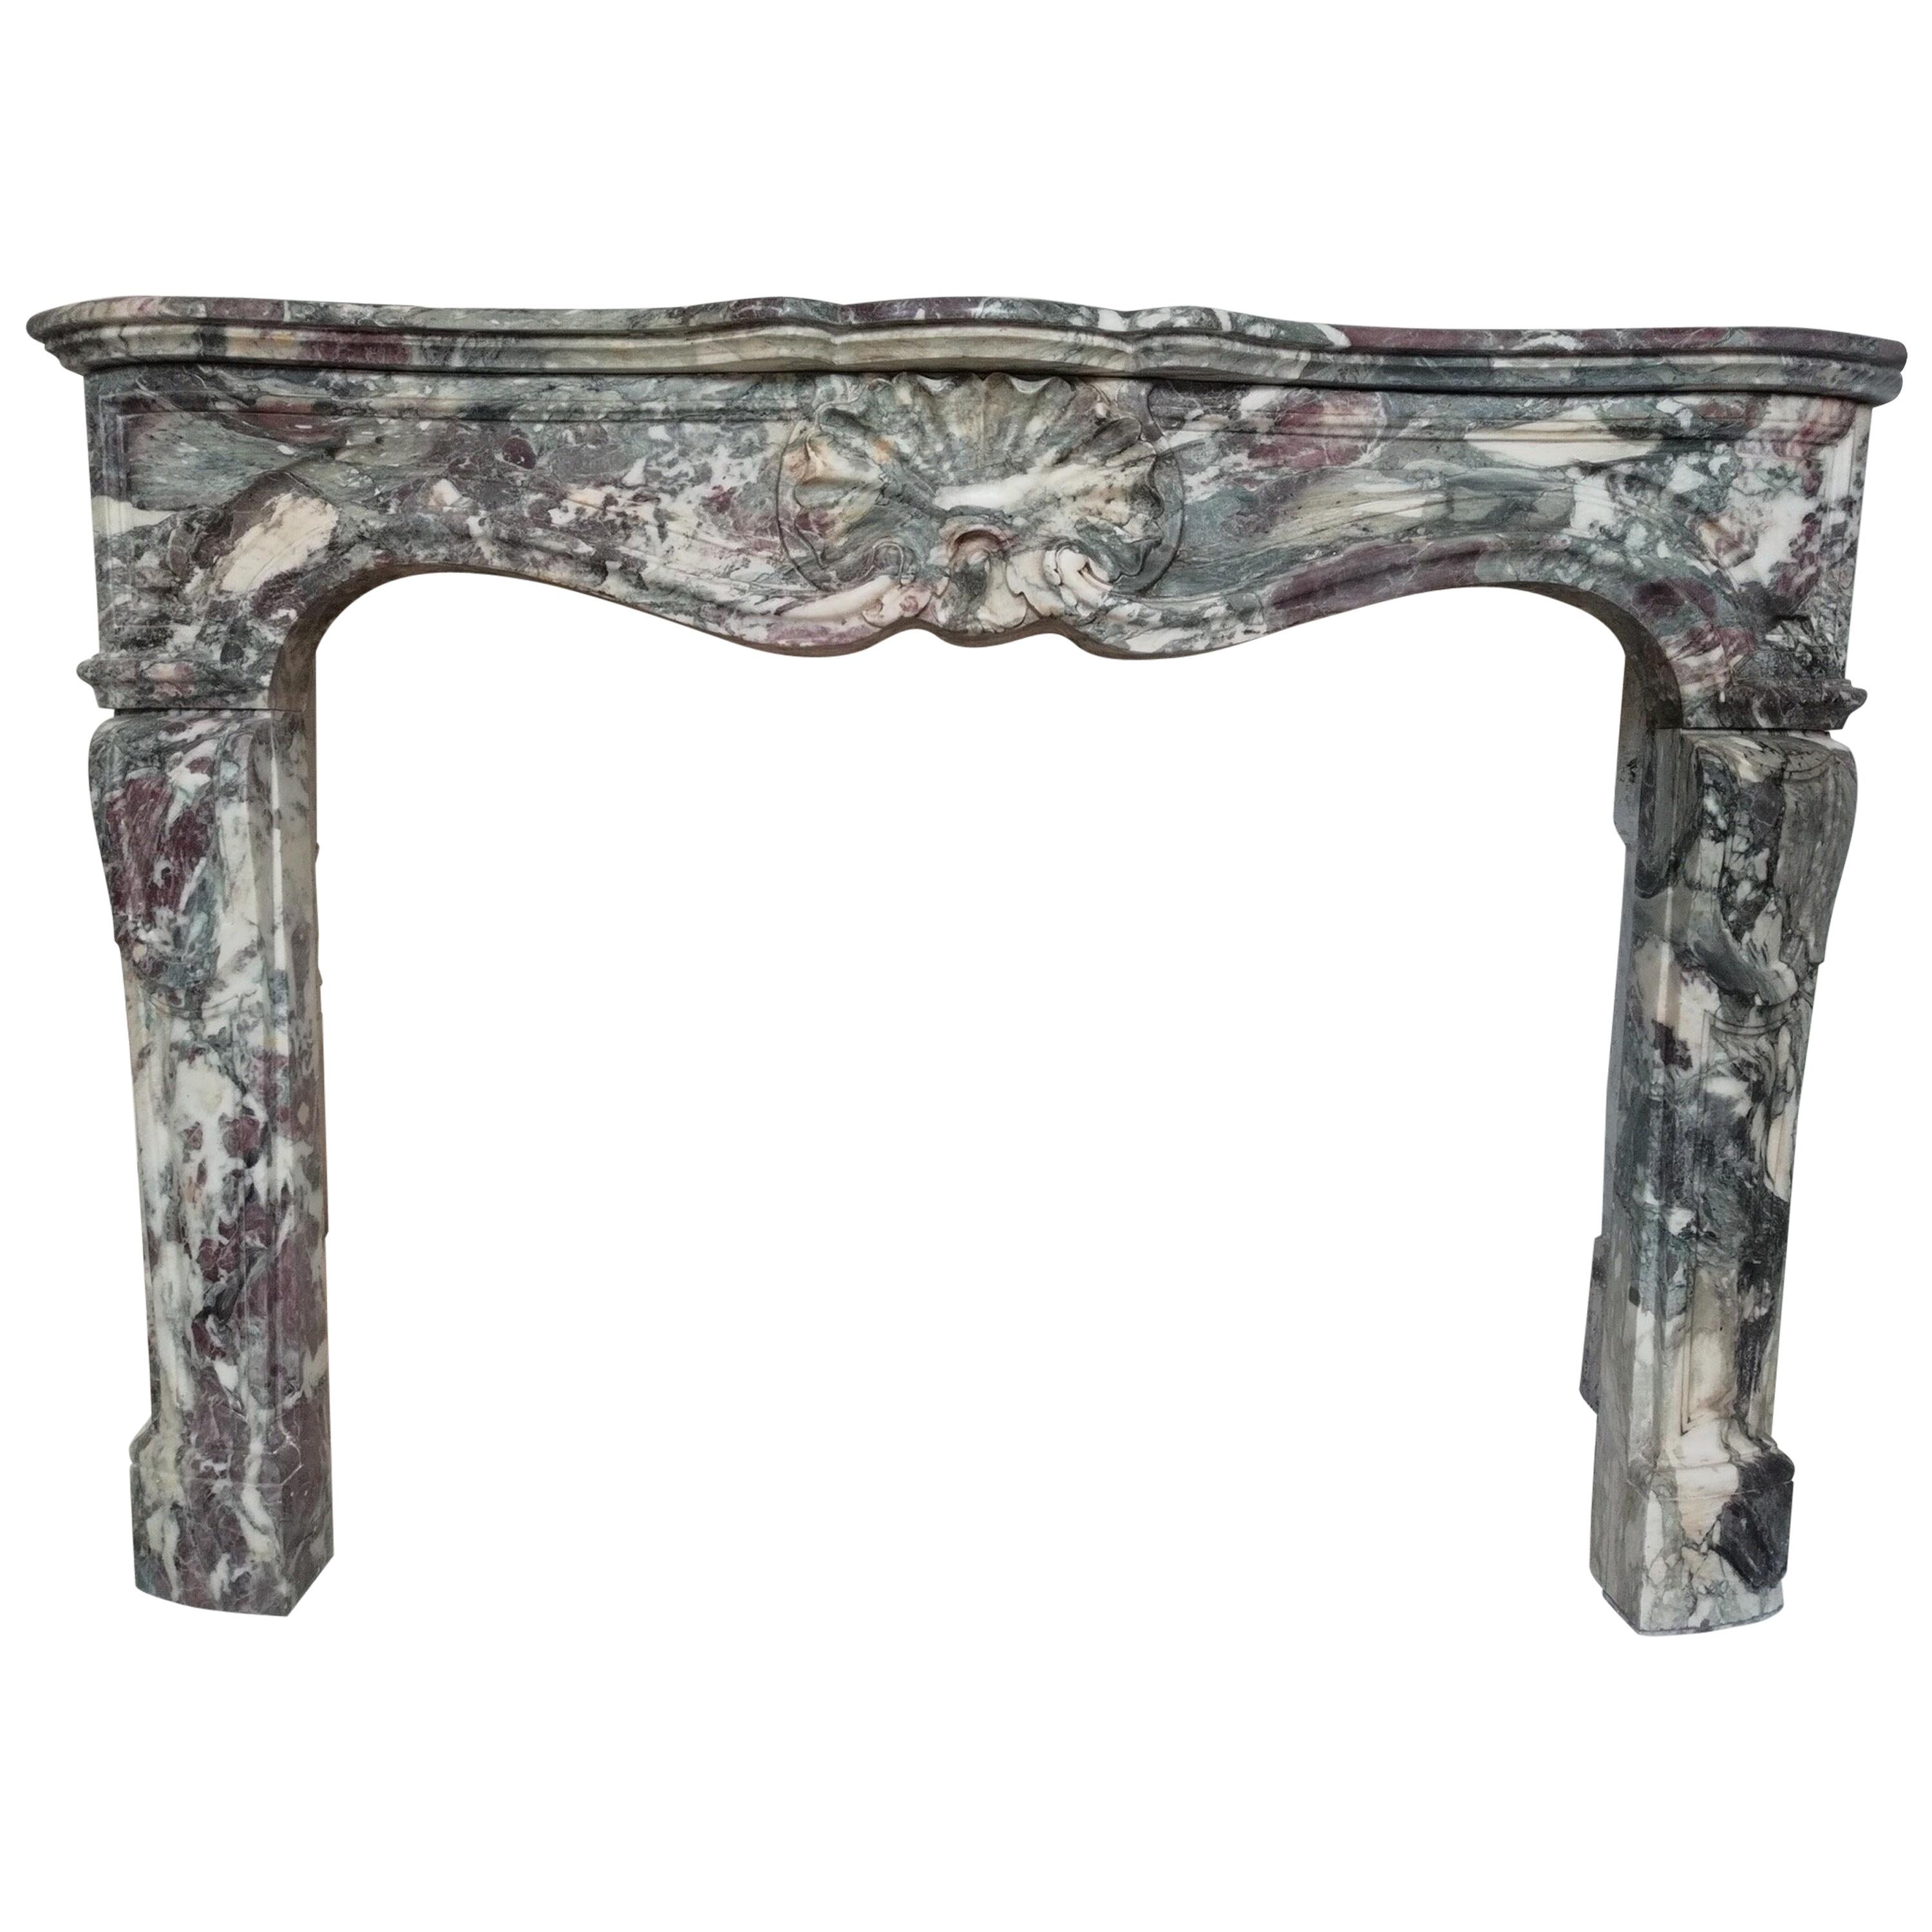 Exceptionnal Regence Style Violet Breccia Marble Fireplace Mantel, 20th Century For Sale